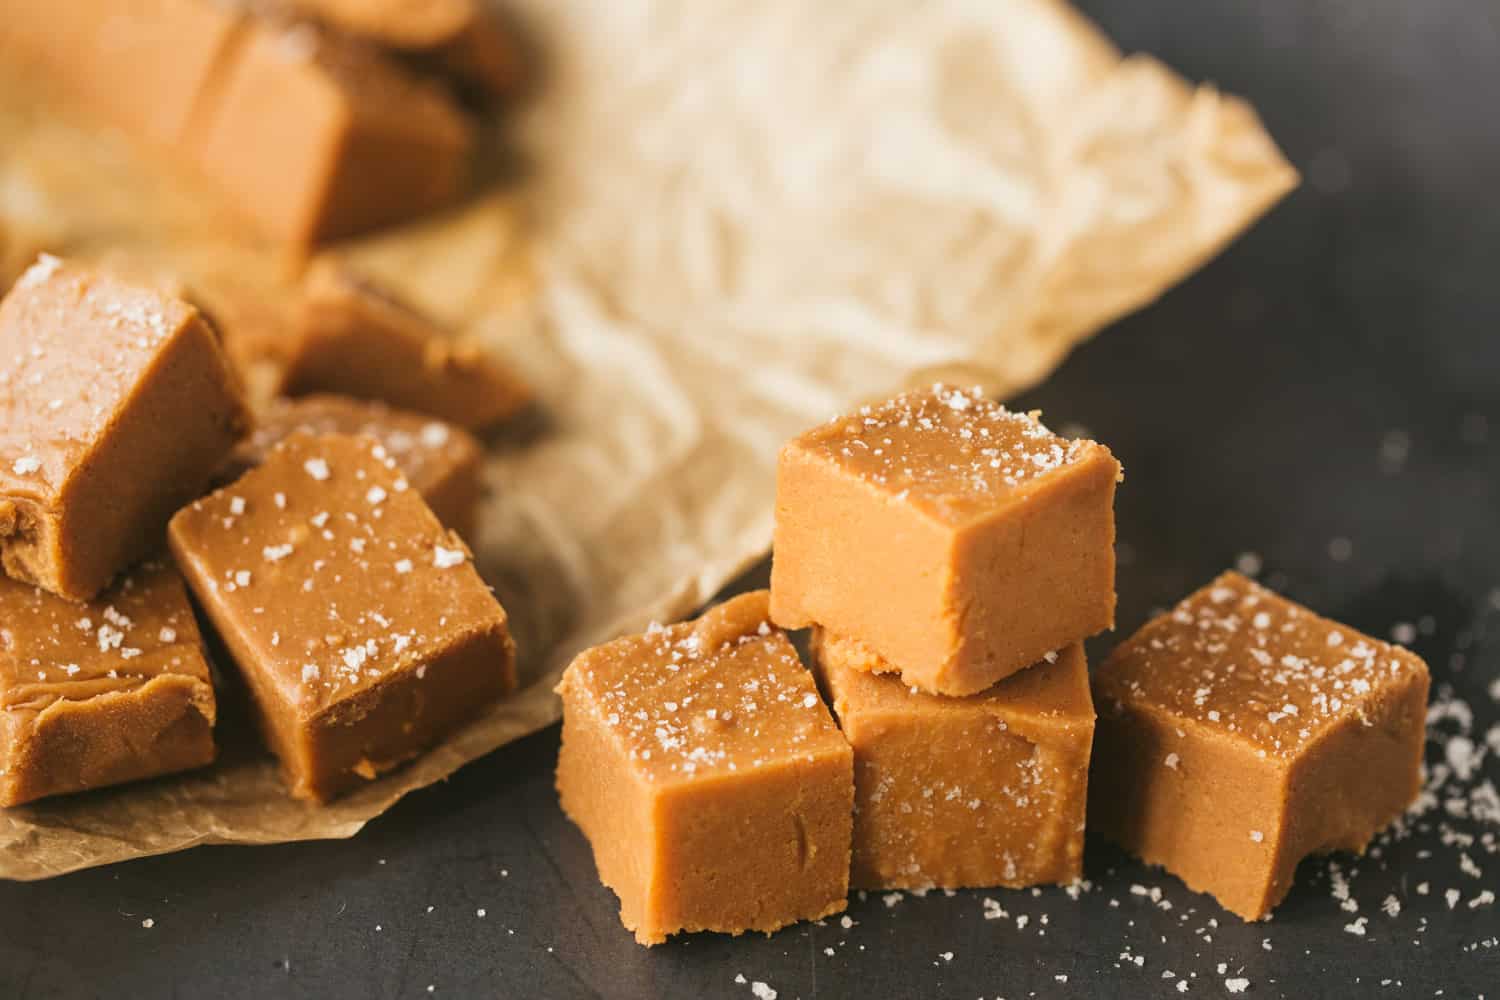 A pile of traditional fudge on a baking paper